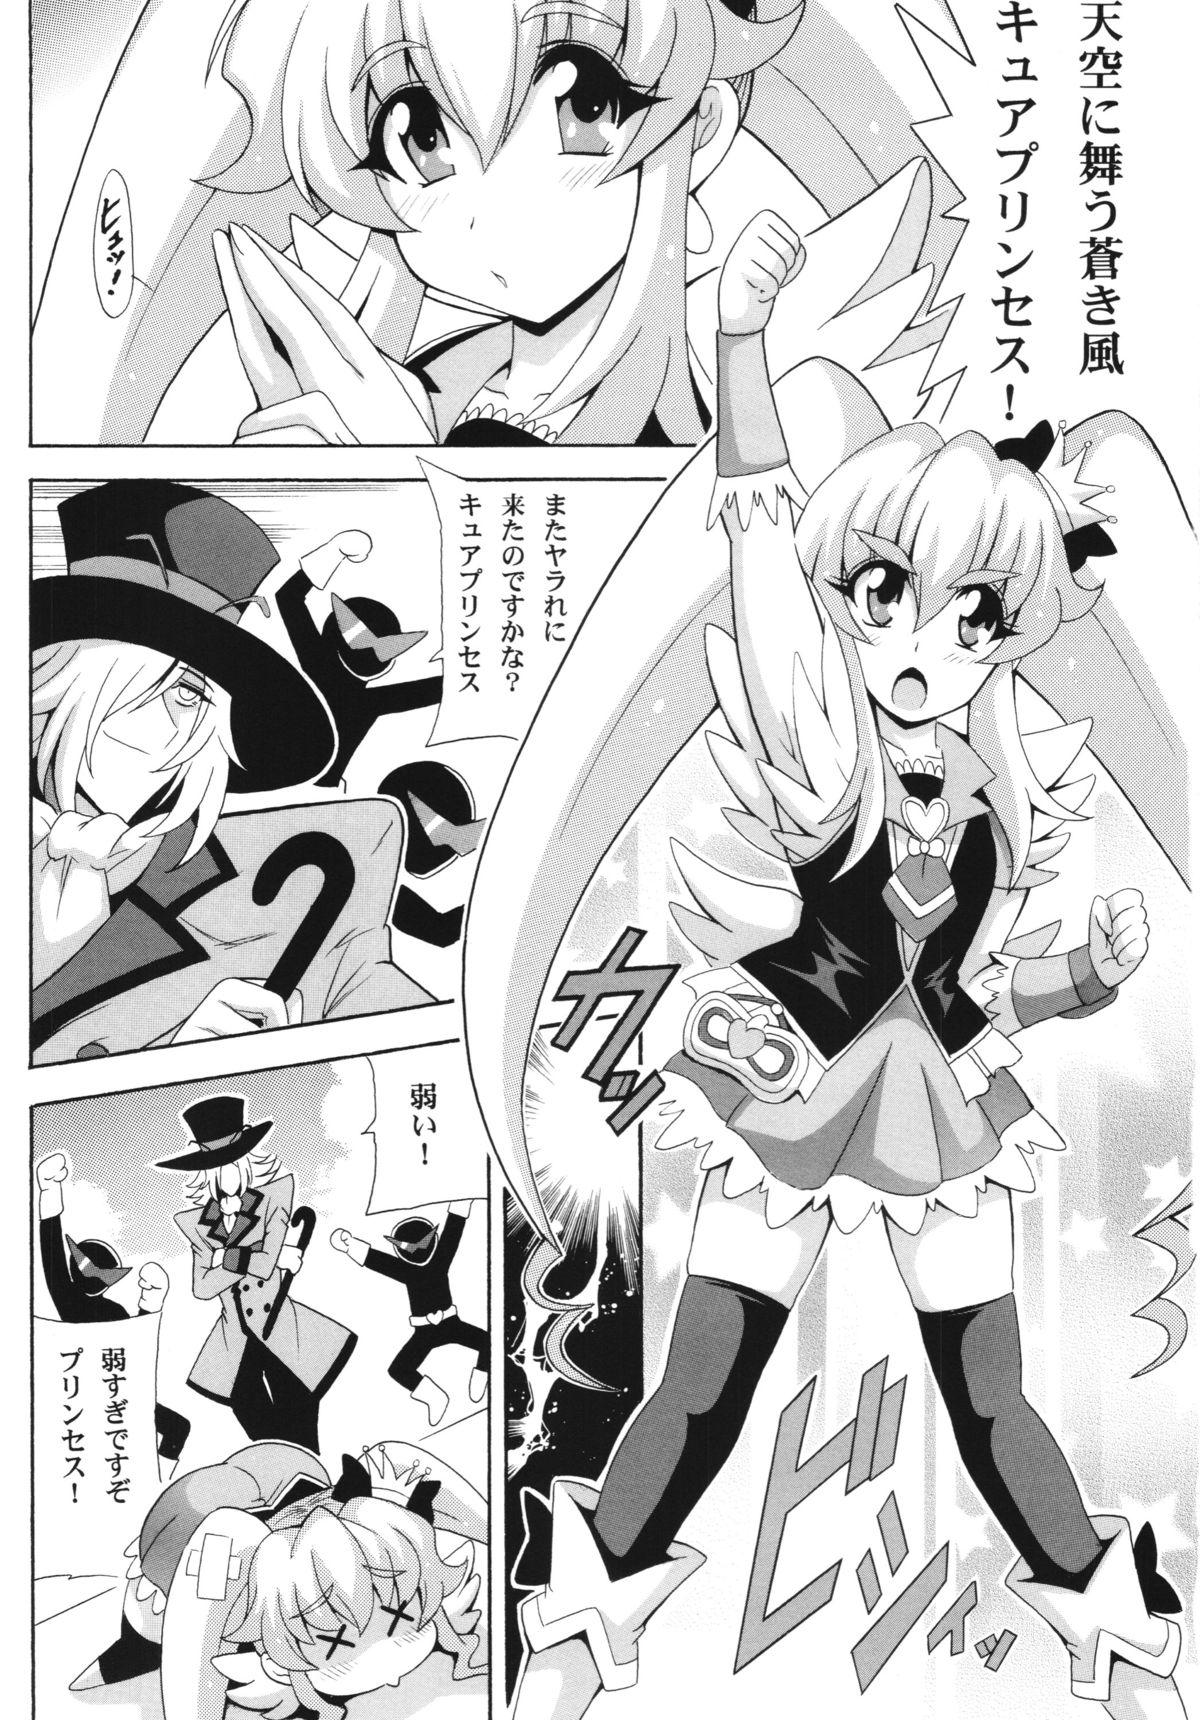 Web Cam THE☆WEAKEST-PRINCESS - Happinesscharge precure Hardcore Fucking - Page 3